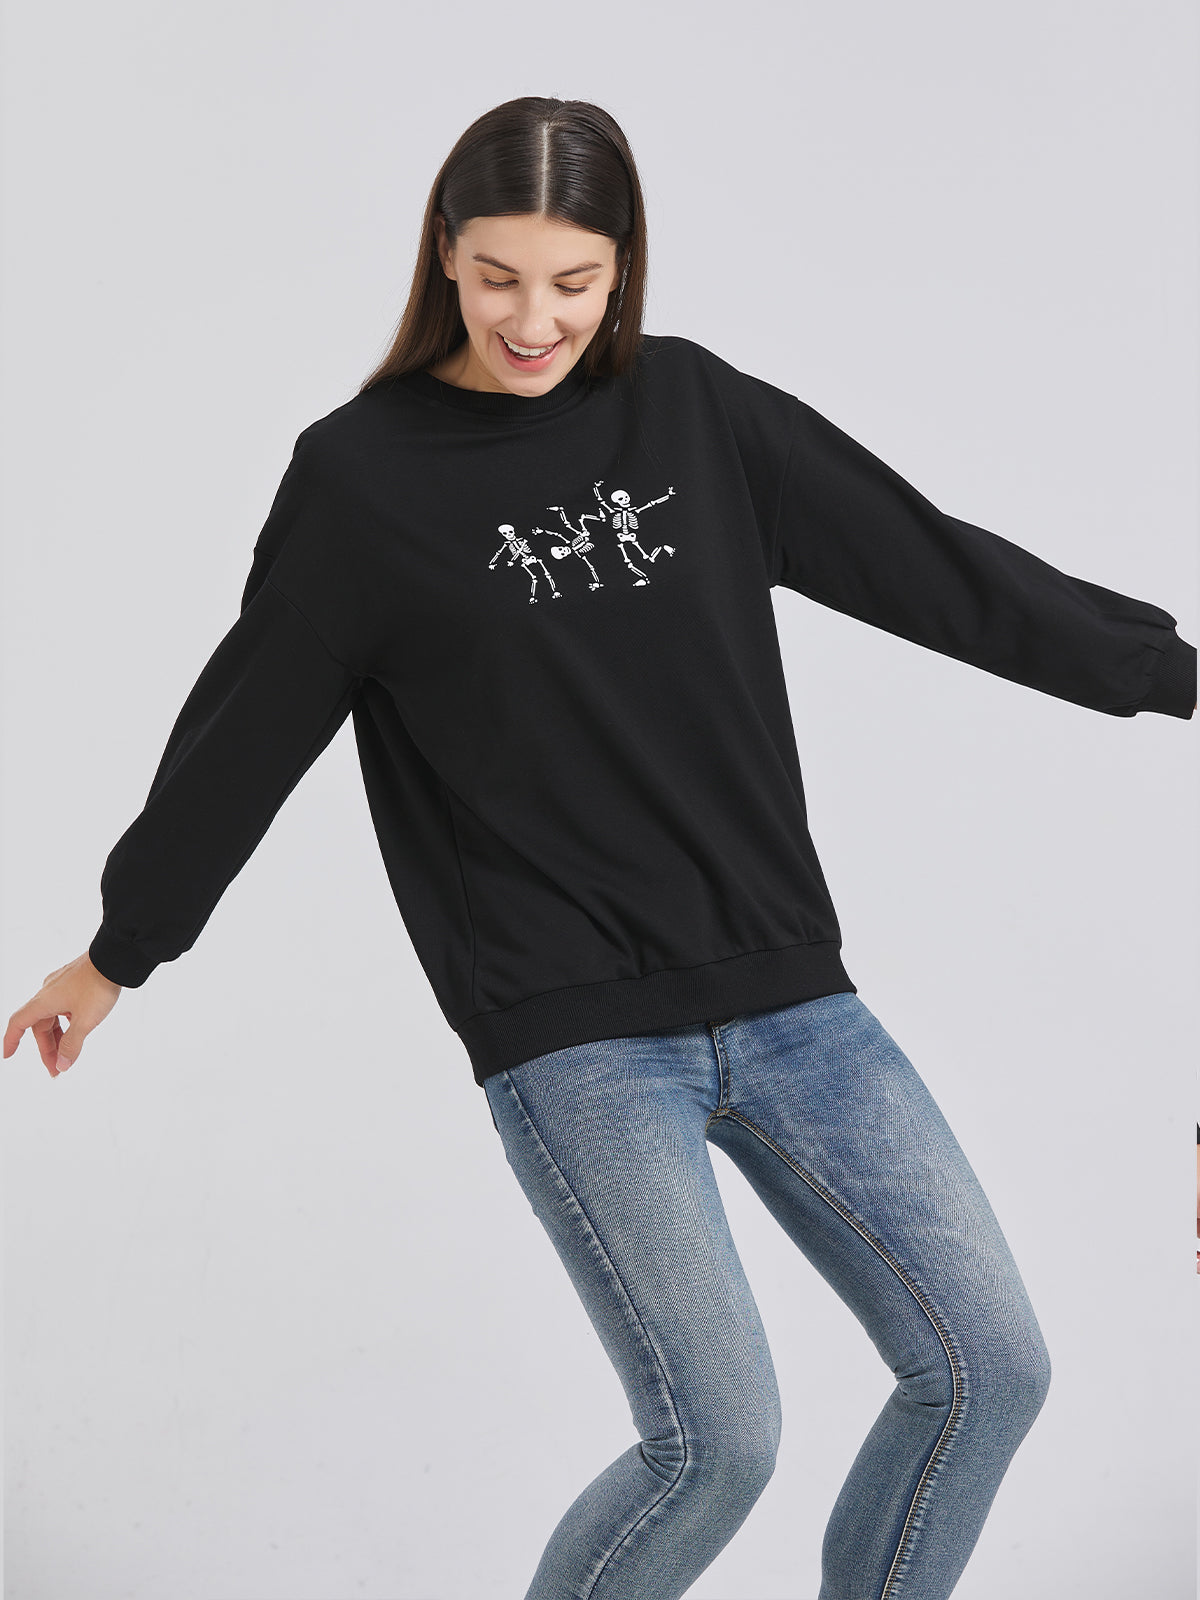 Express your style with a Halloween sweatshirt: A unique and comfortable option.